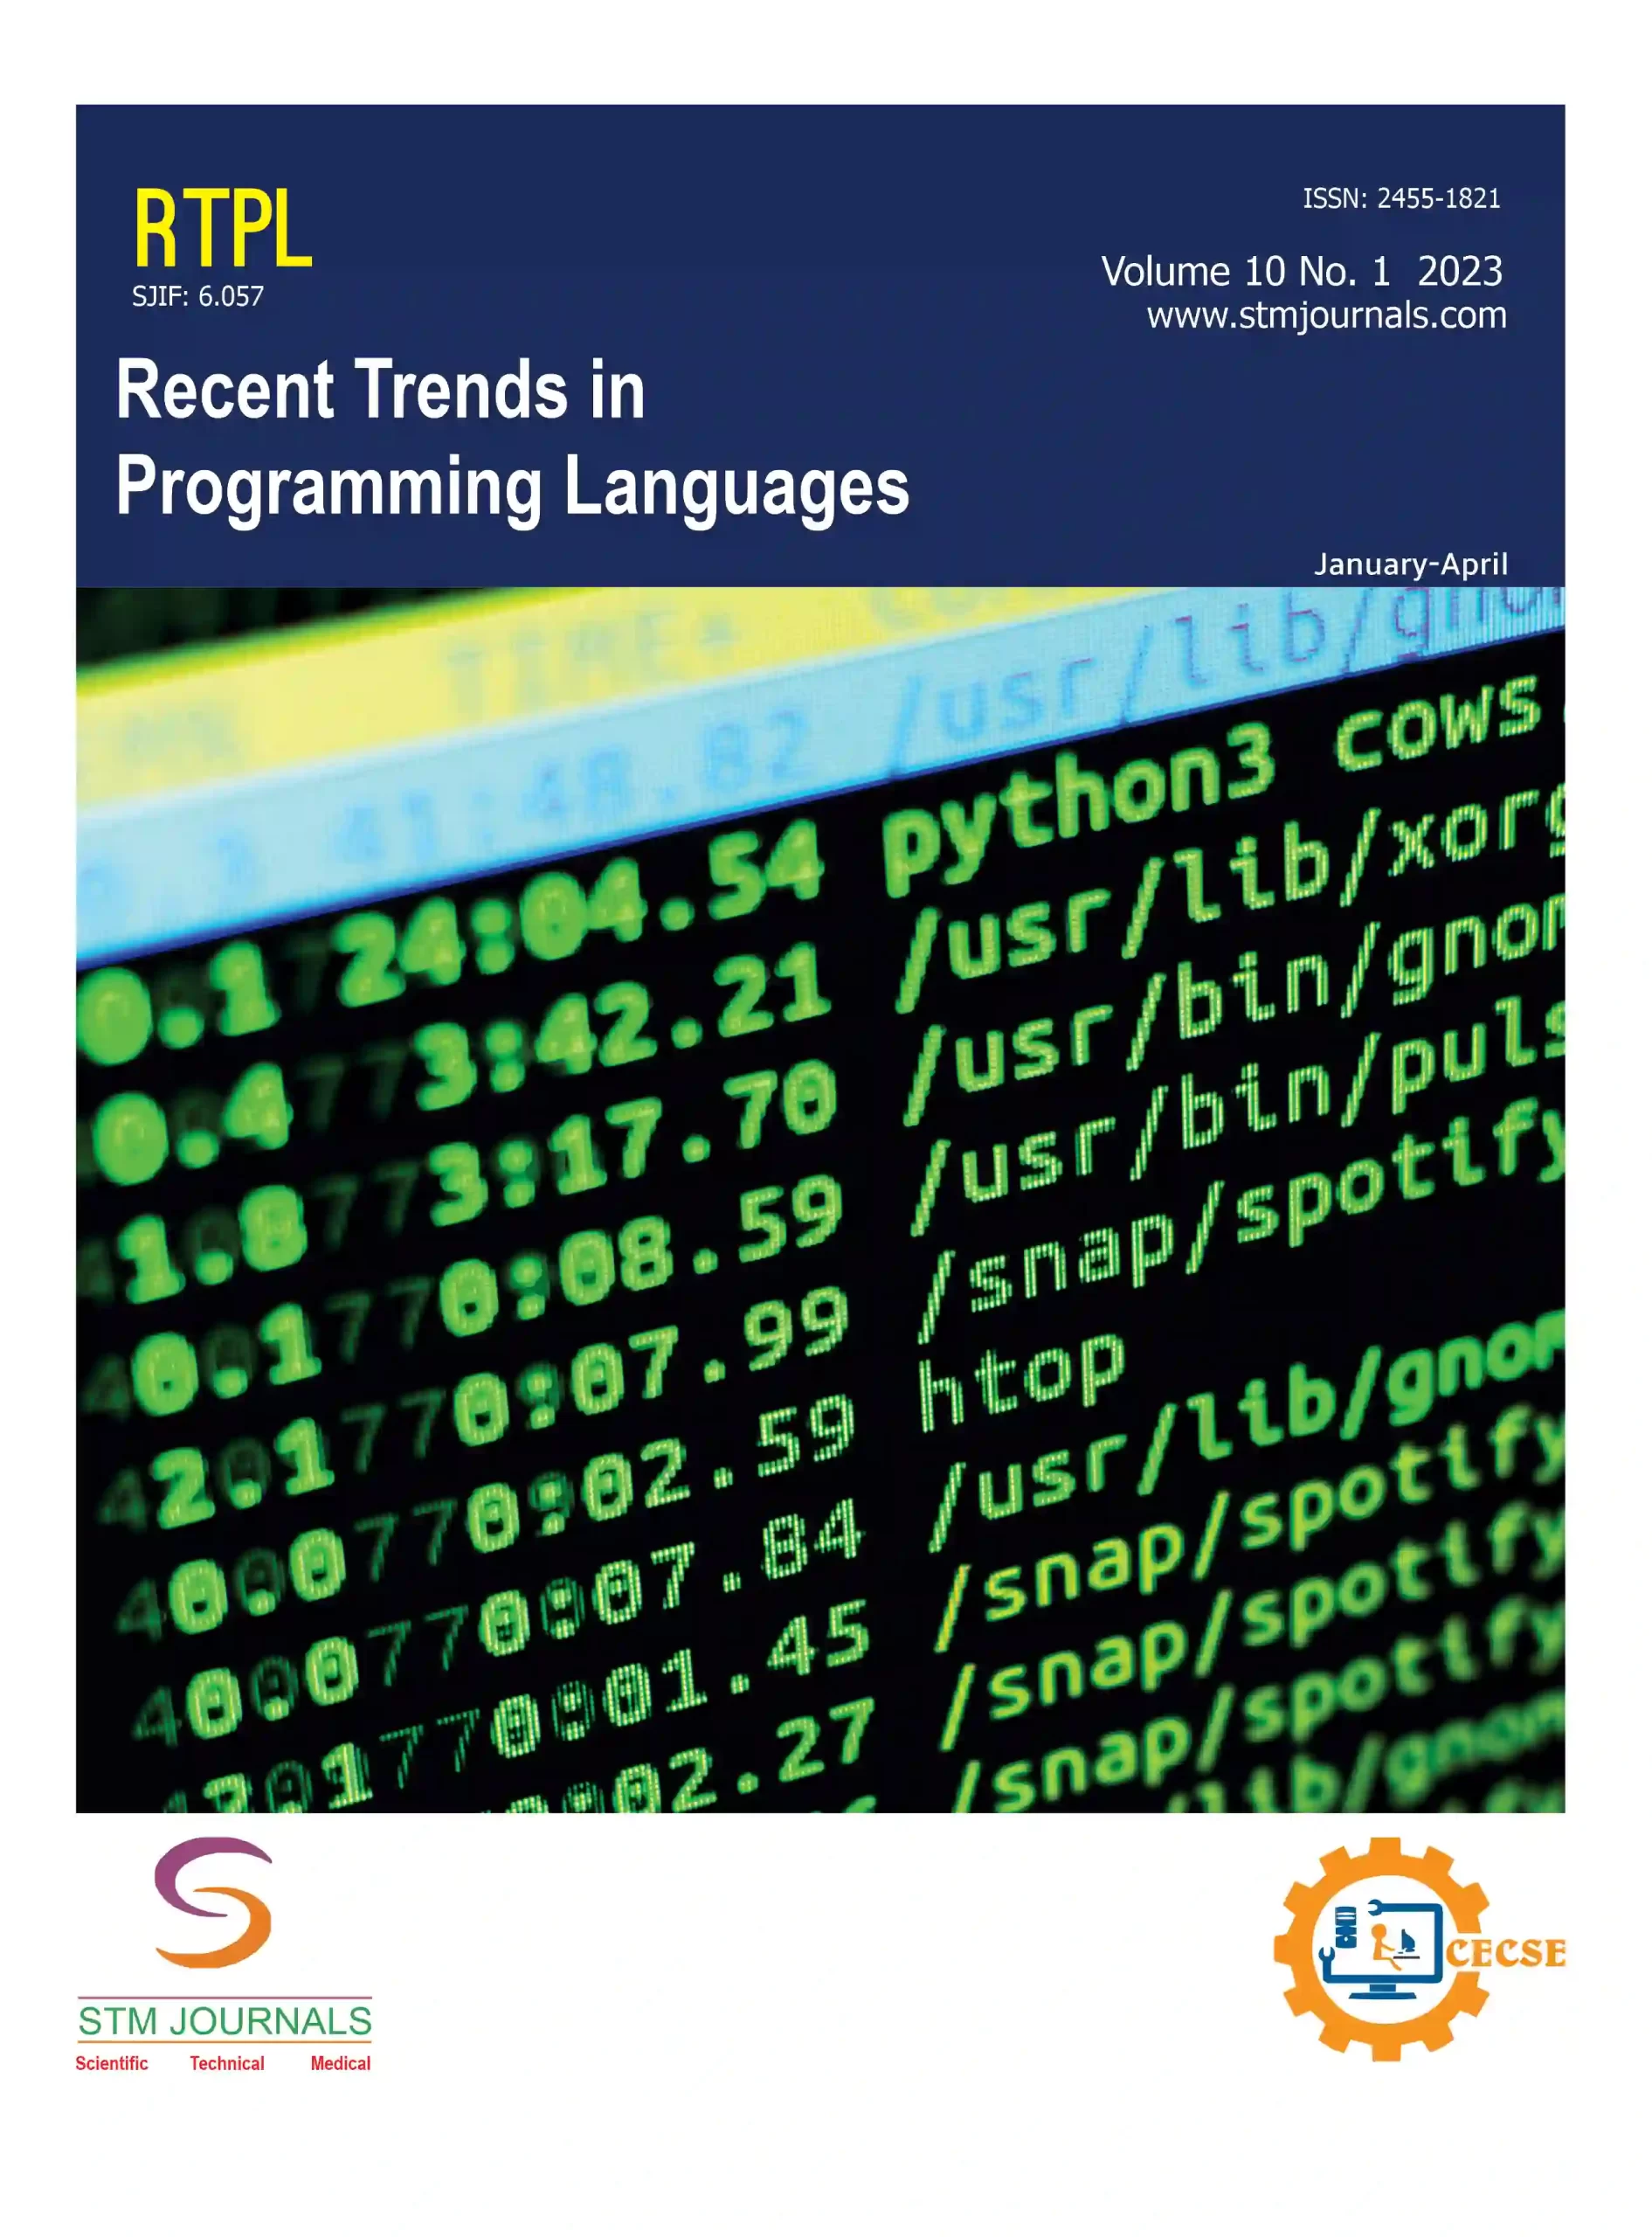 Recent Trends in Programming languages Cover